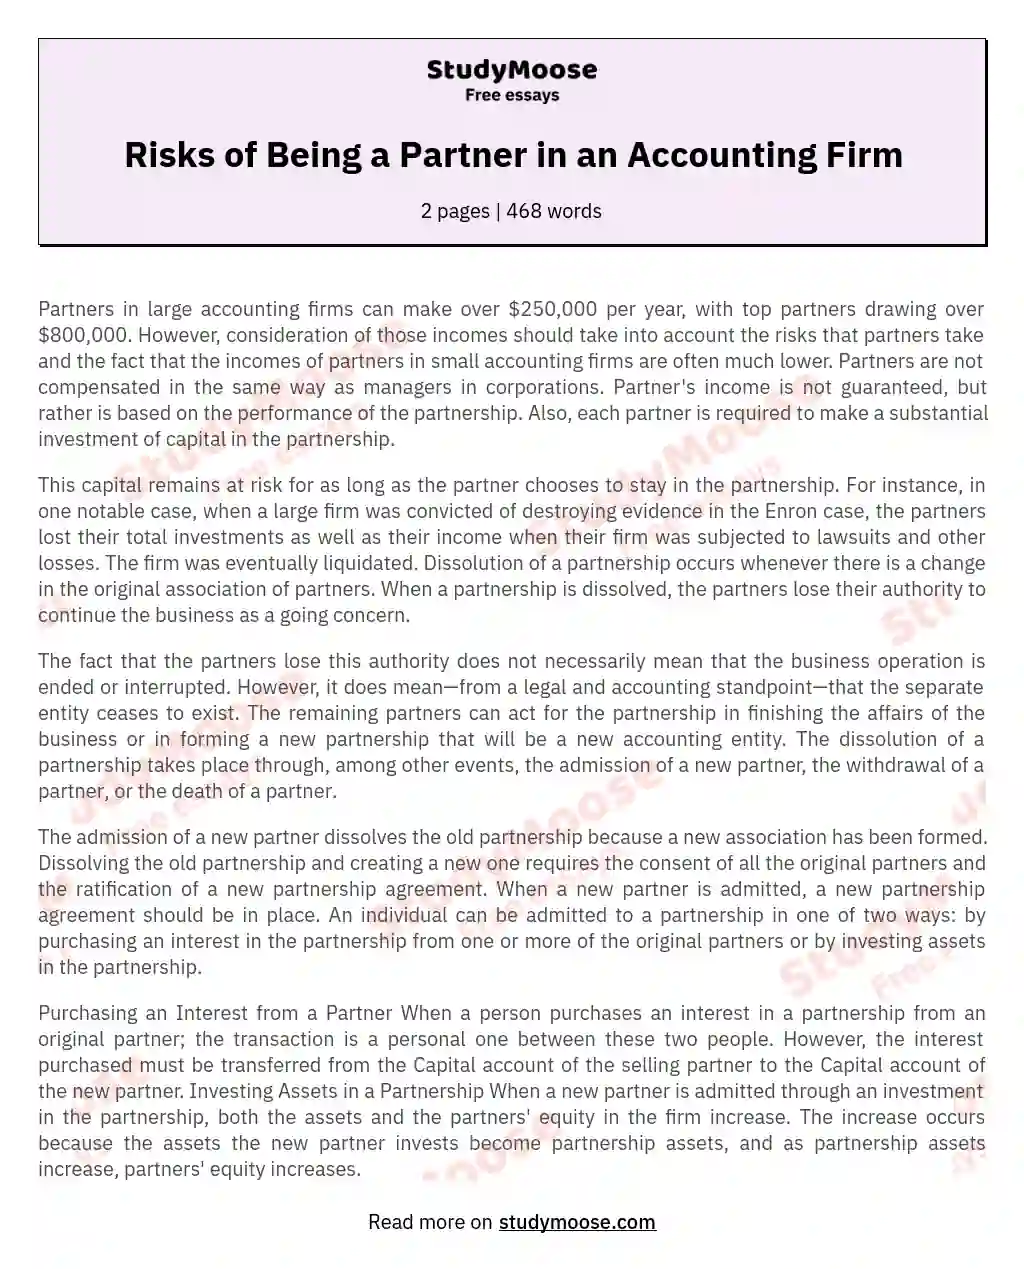 Risks of Being a Partner in an Accounting Firm